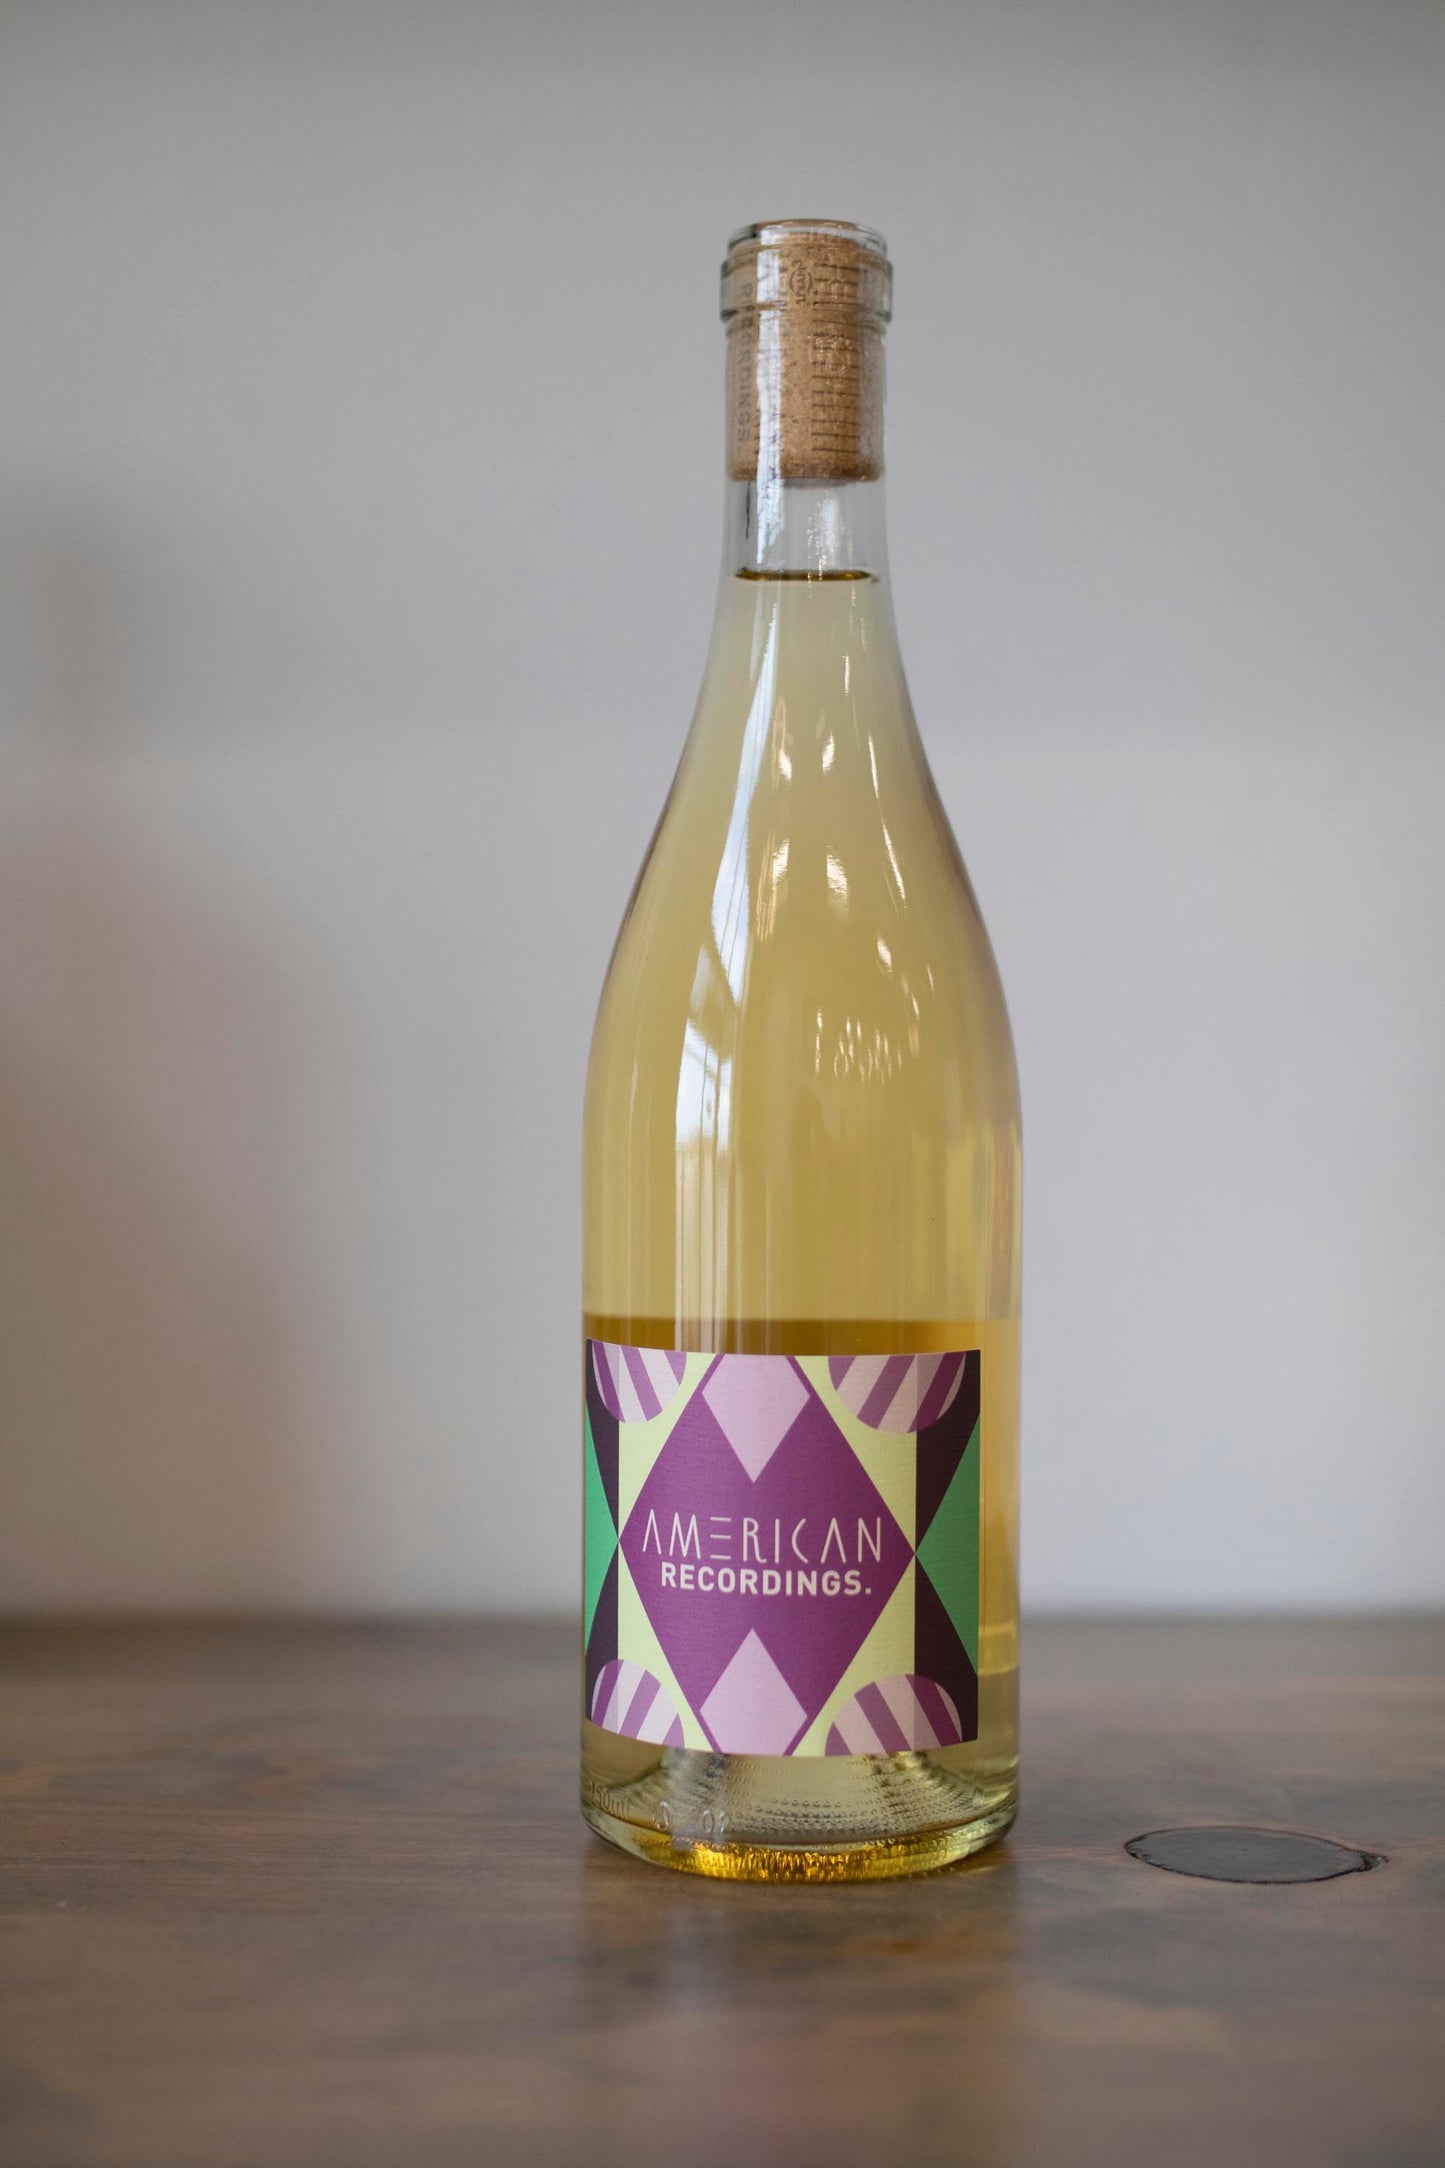 Bottle of American Recordings Chard found at Vine & Board in 3809 NW 166th St Suite 1, Edmond, OK 73012